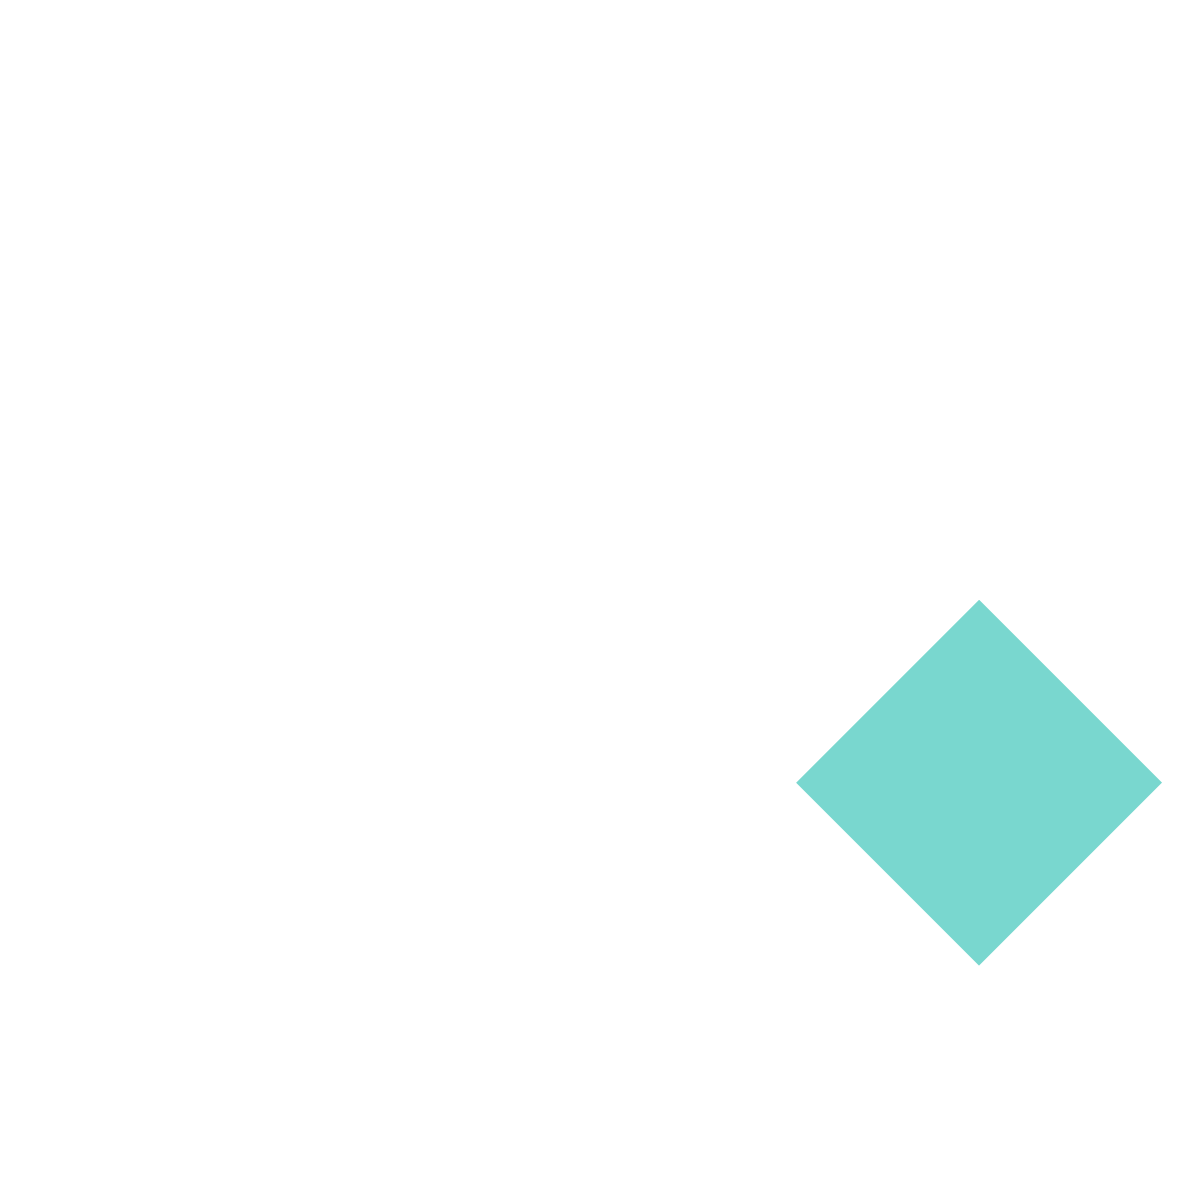 teal square